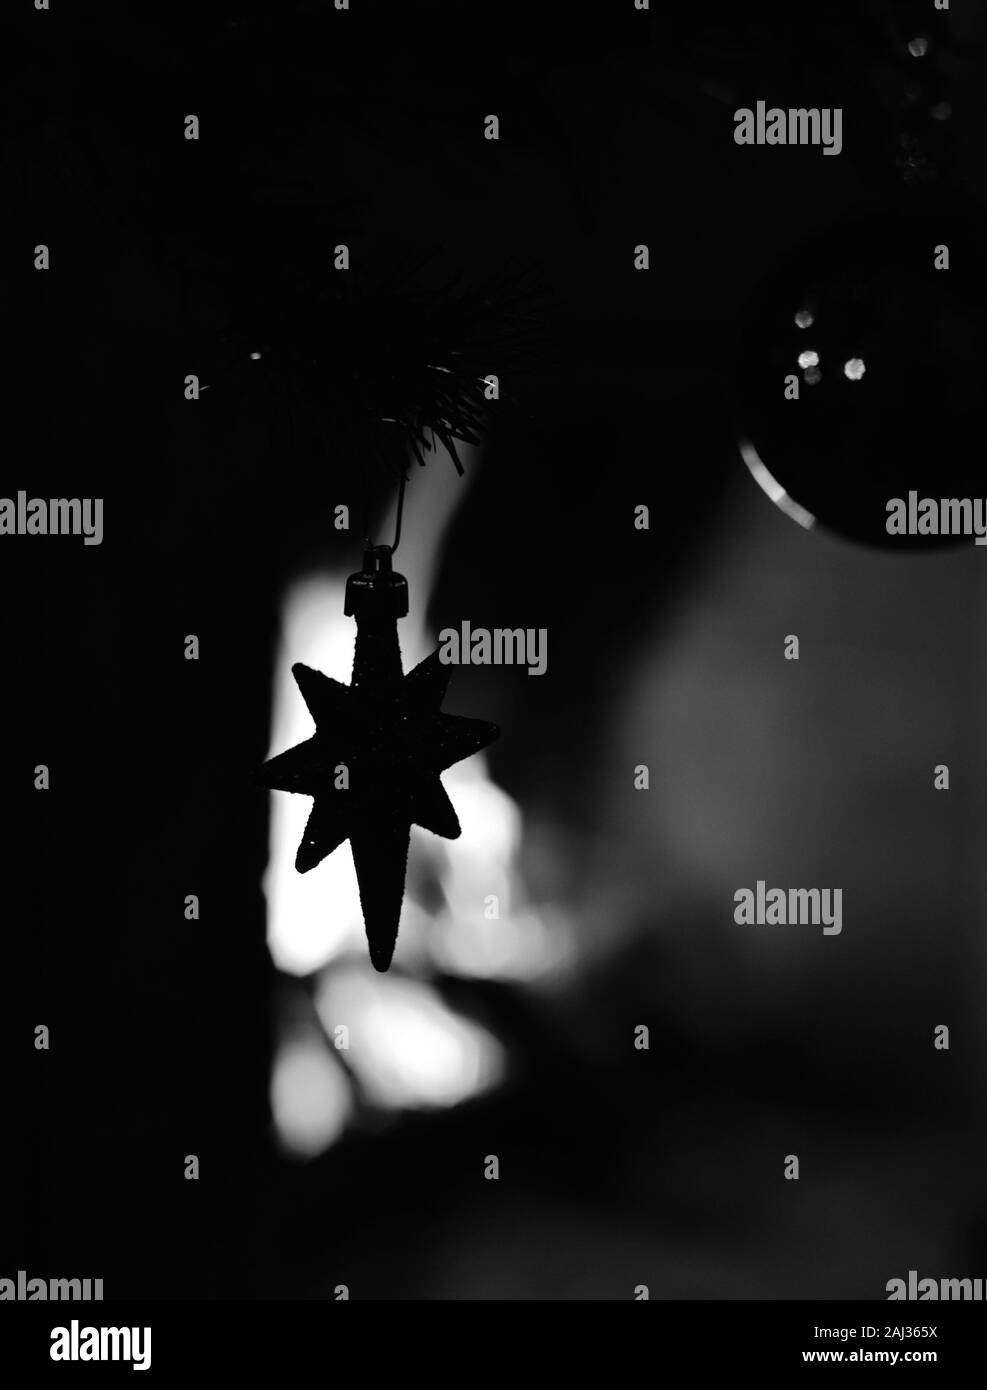 Decorative star hanging from a christmas tree against the illumination of a fireplace. Concept: Festive season. Stock Photo